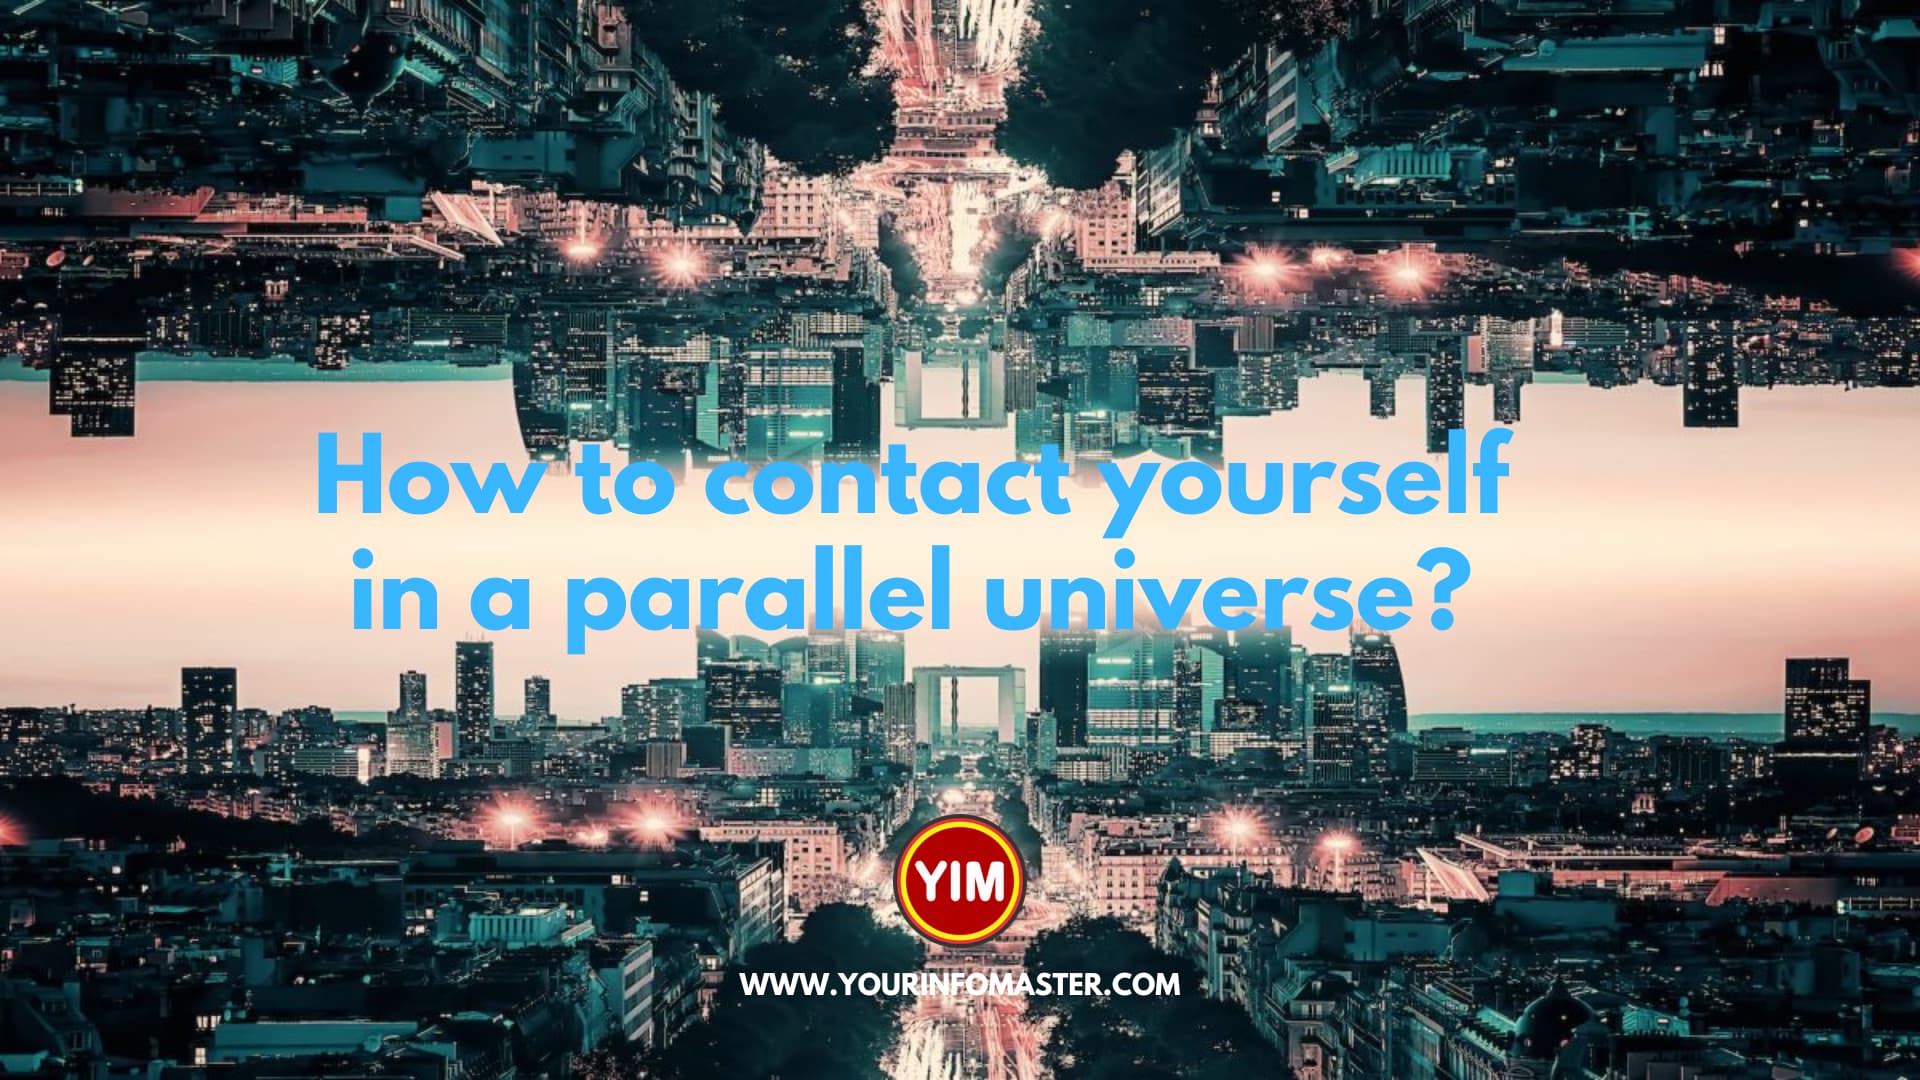 How to contact yourself in a parallel universe